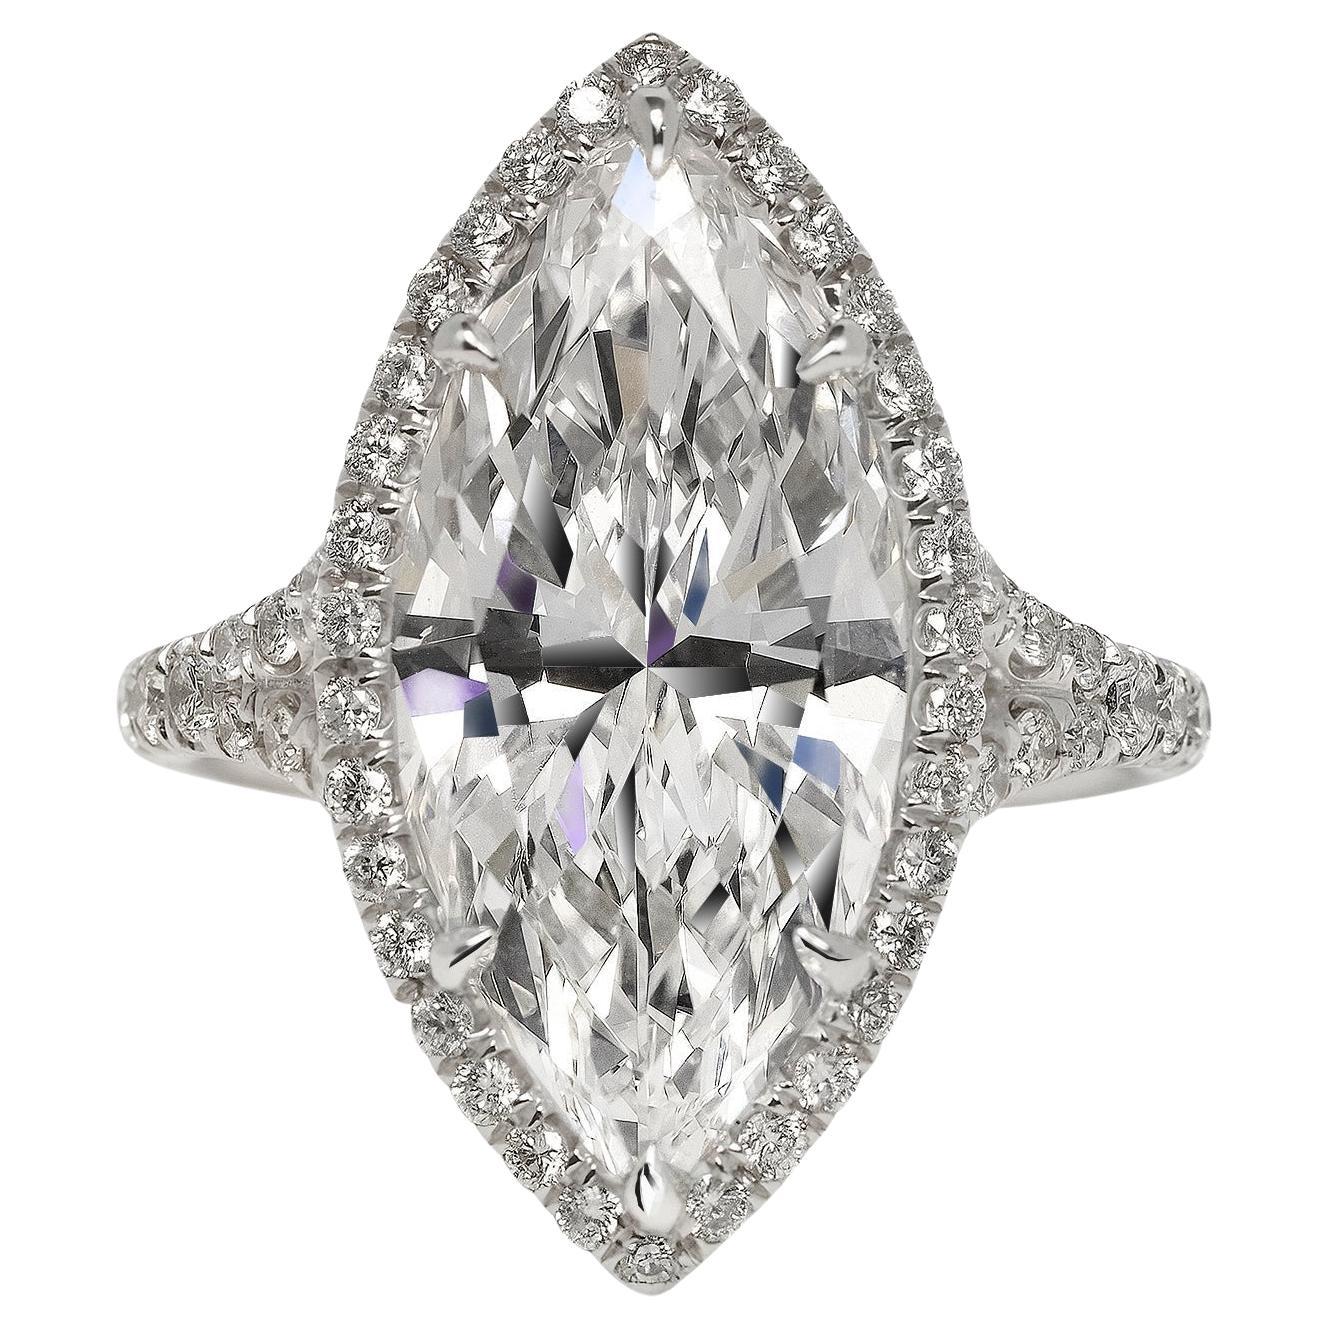 6 Carat Marquise Cut Diamond Engagement Ring GIA Certified E IF